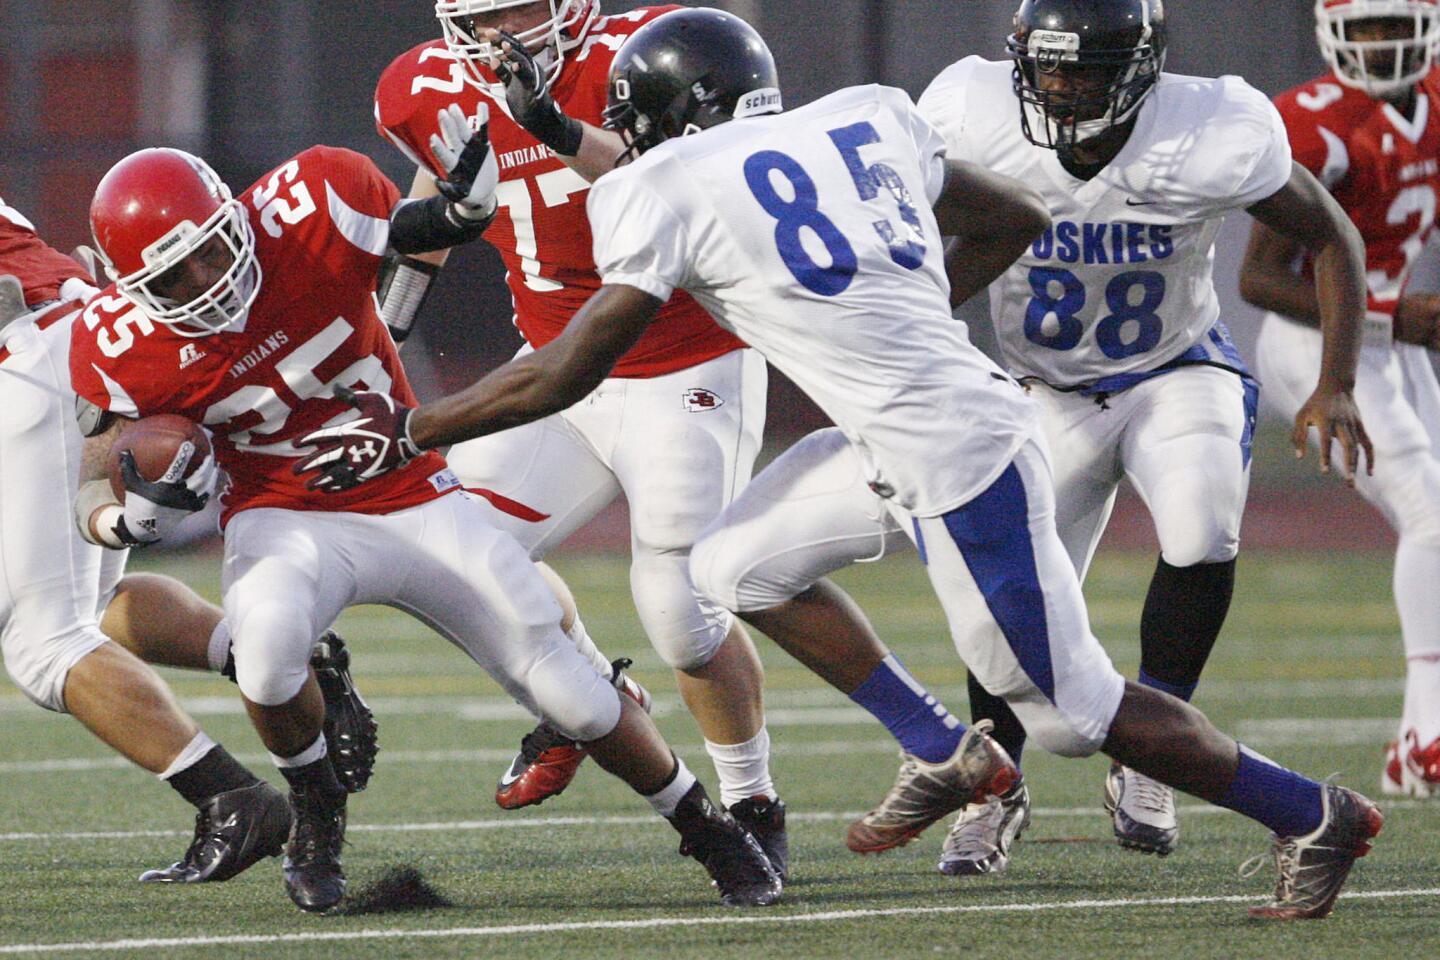 Burroughs' Israel Montes, left, is tackled by North Hollywood during a game at John Burroughs High School in Burbank on Friday, September 7, 2012.